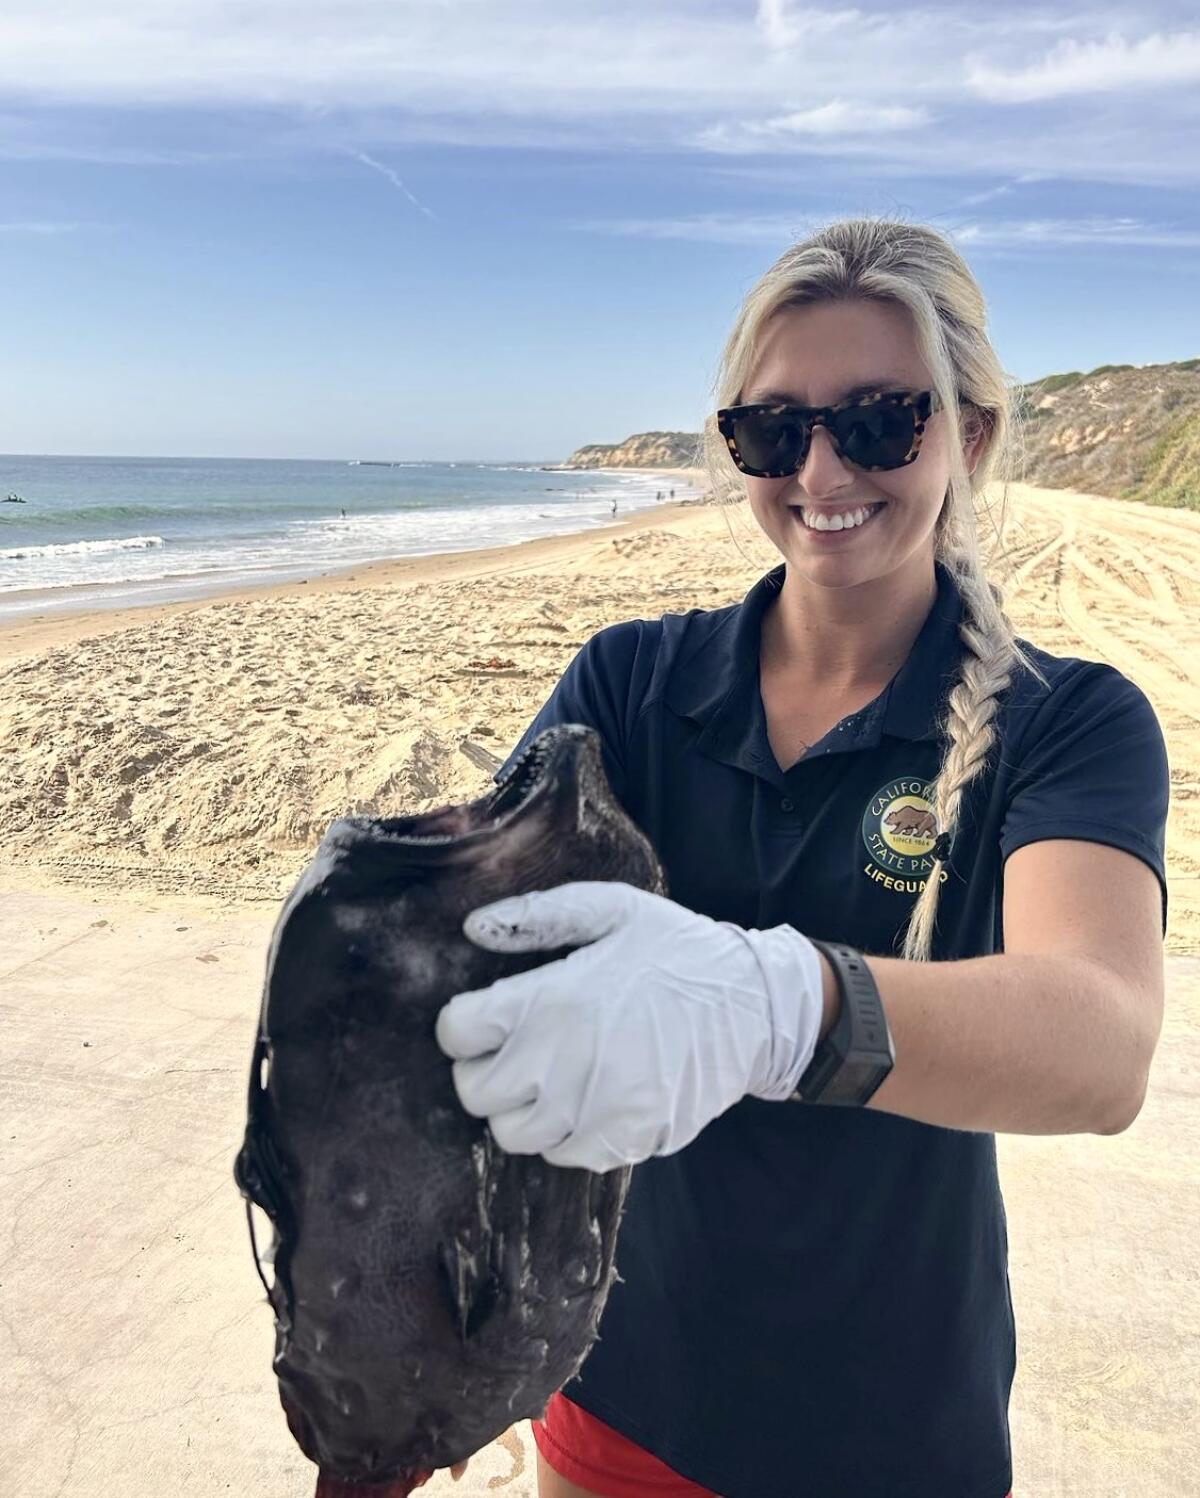 Seasonal lifeguard Sierra Fockler discovered a 14-inch Pacific football fish at Crystal Cove State Park.